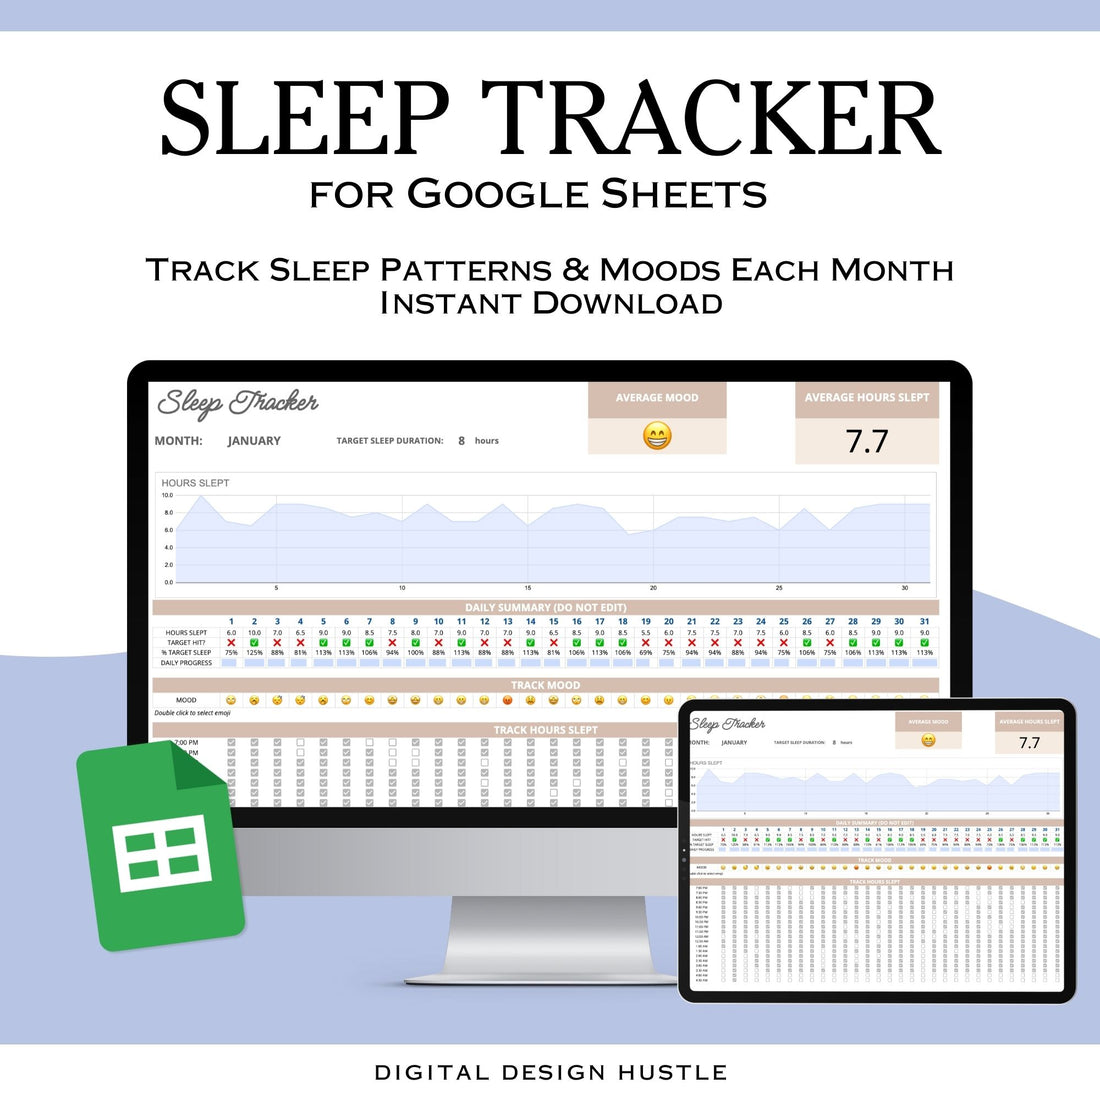 Elevate your sleep monitoring game with our intuitive Sleep Tracker Spreadsheet with mood tracker is tailored for Google Sheets! Our streamlined one-tab planner simplifies the process of tracking your sleep patterns and moods month by month.